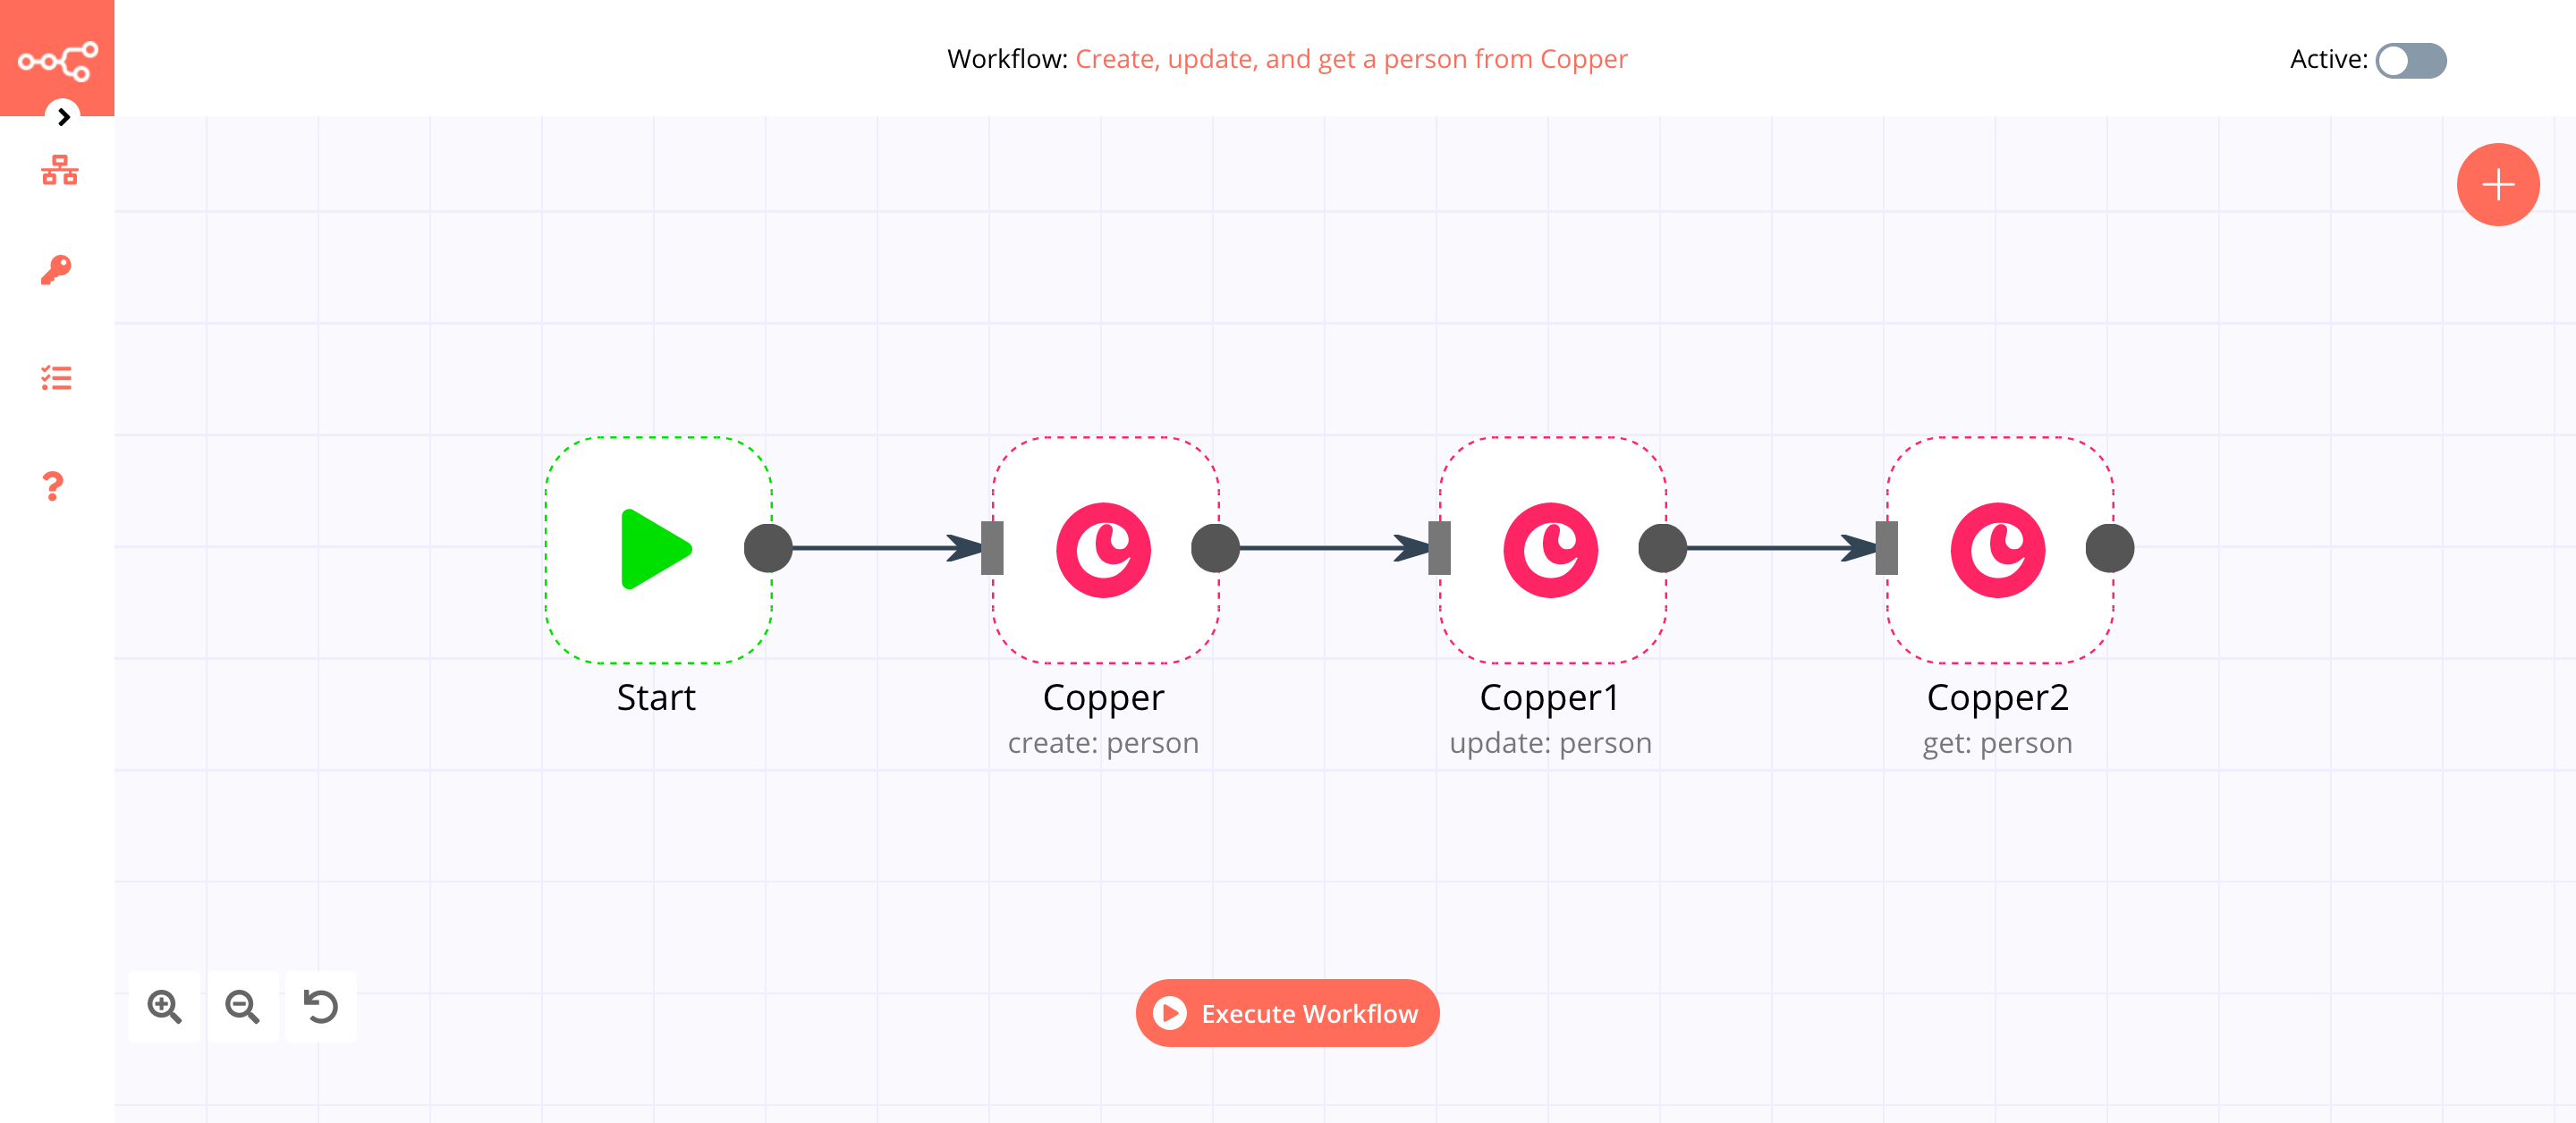 A workflow with the Copper node